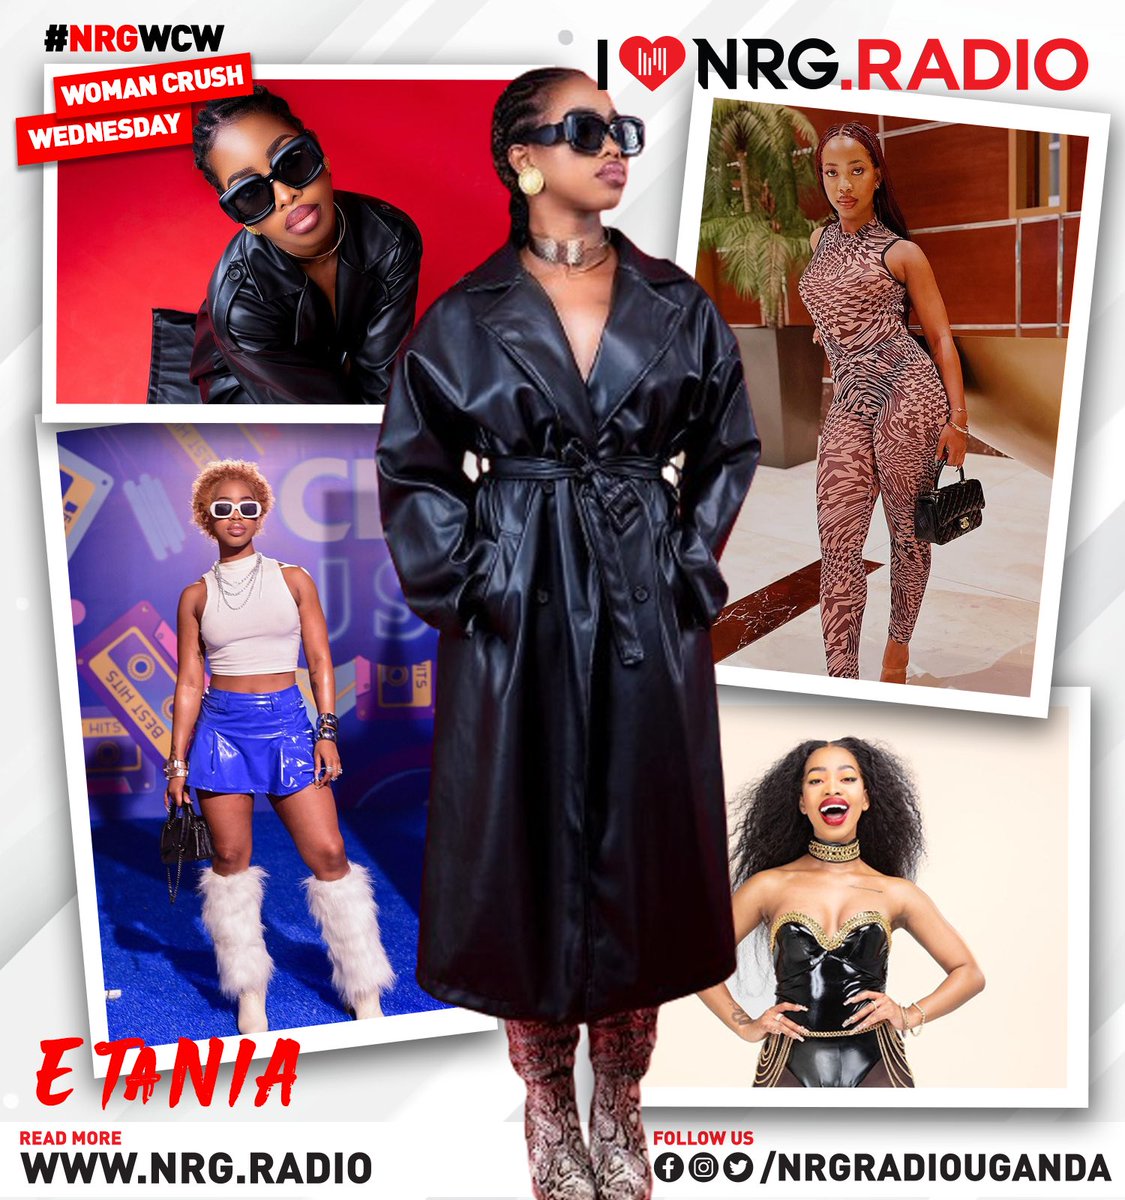 Crushing on our very own @forever_etania .. Life of the party 🥳🥳🥰 #NRGWCW #NRGRadioUG